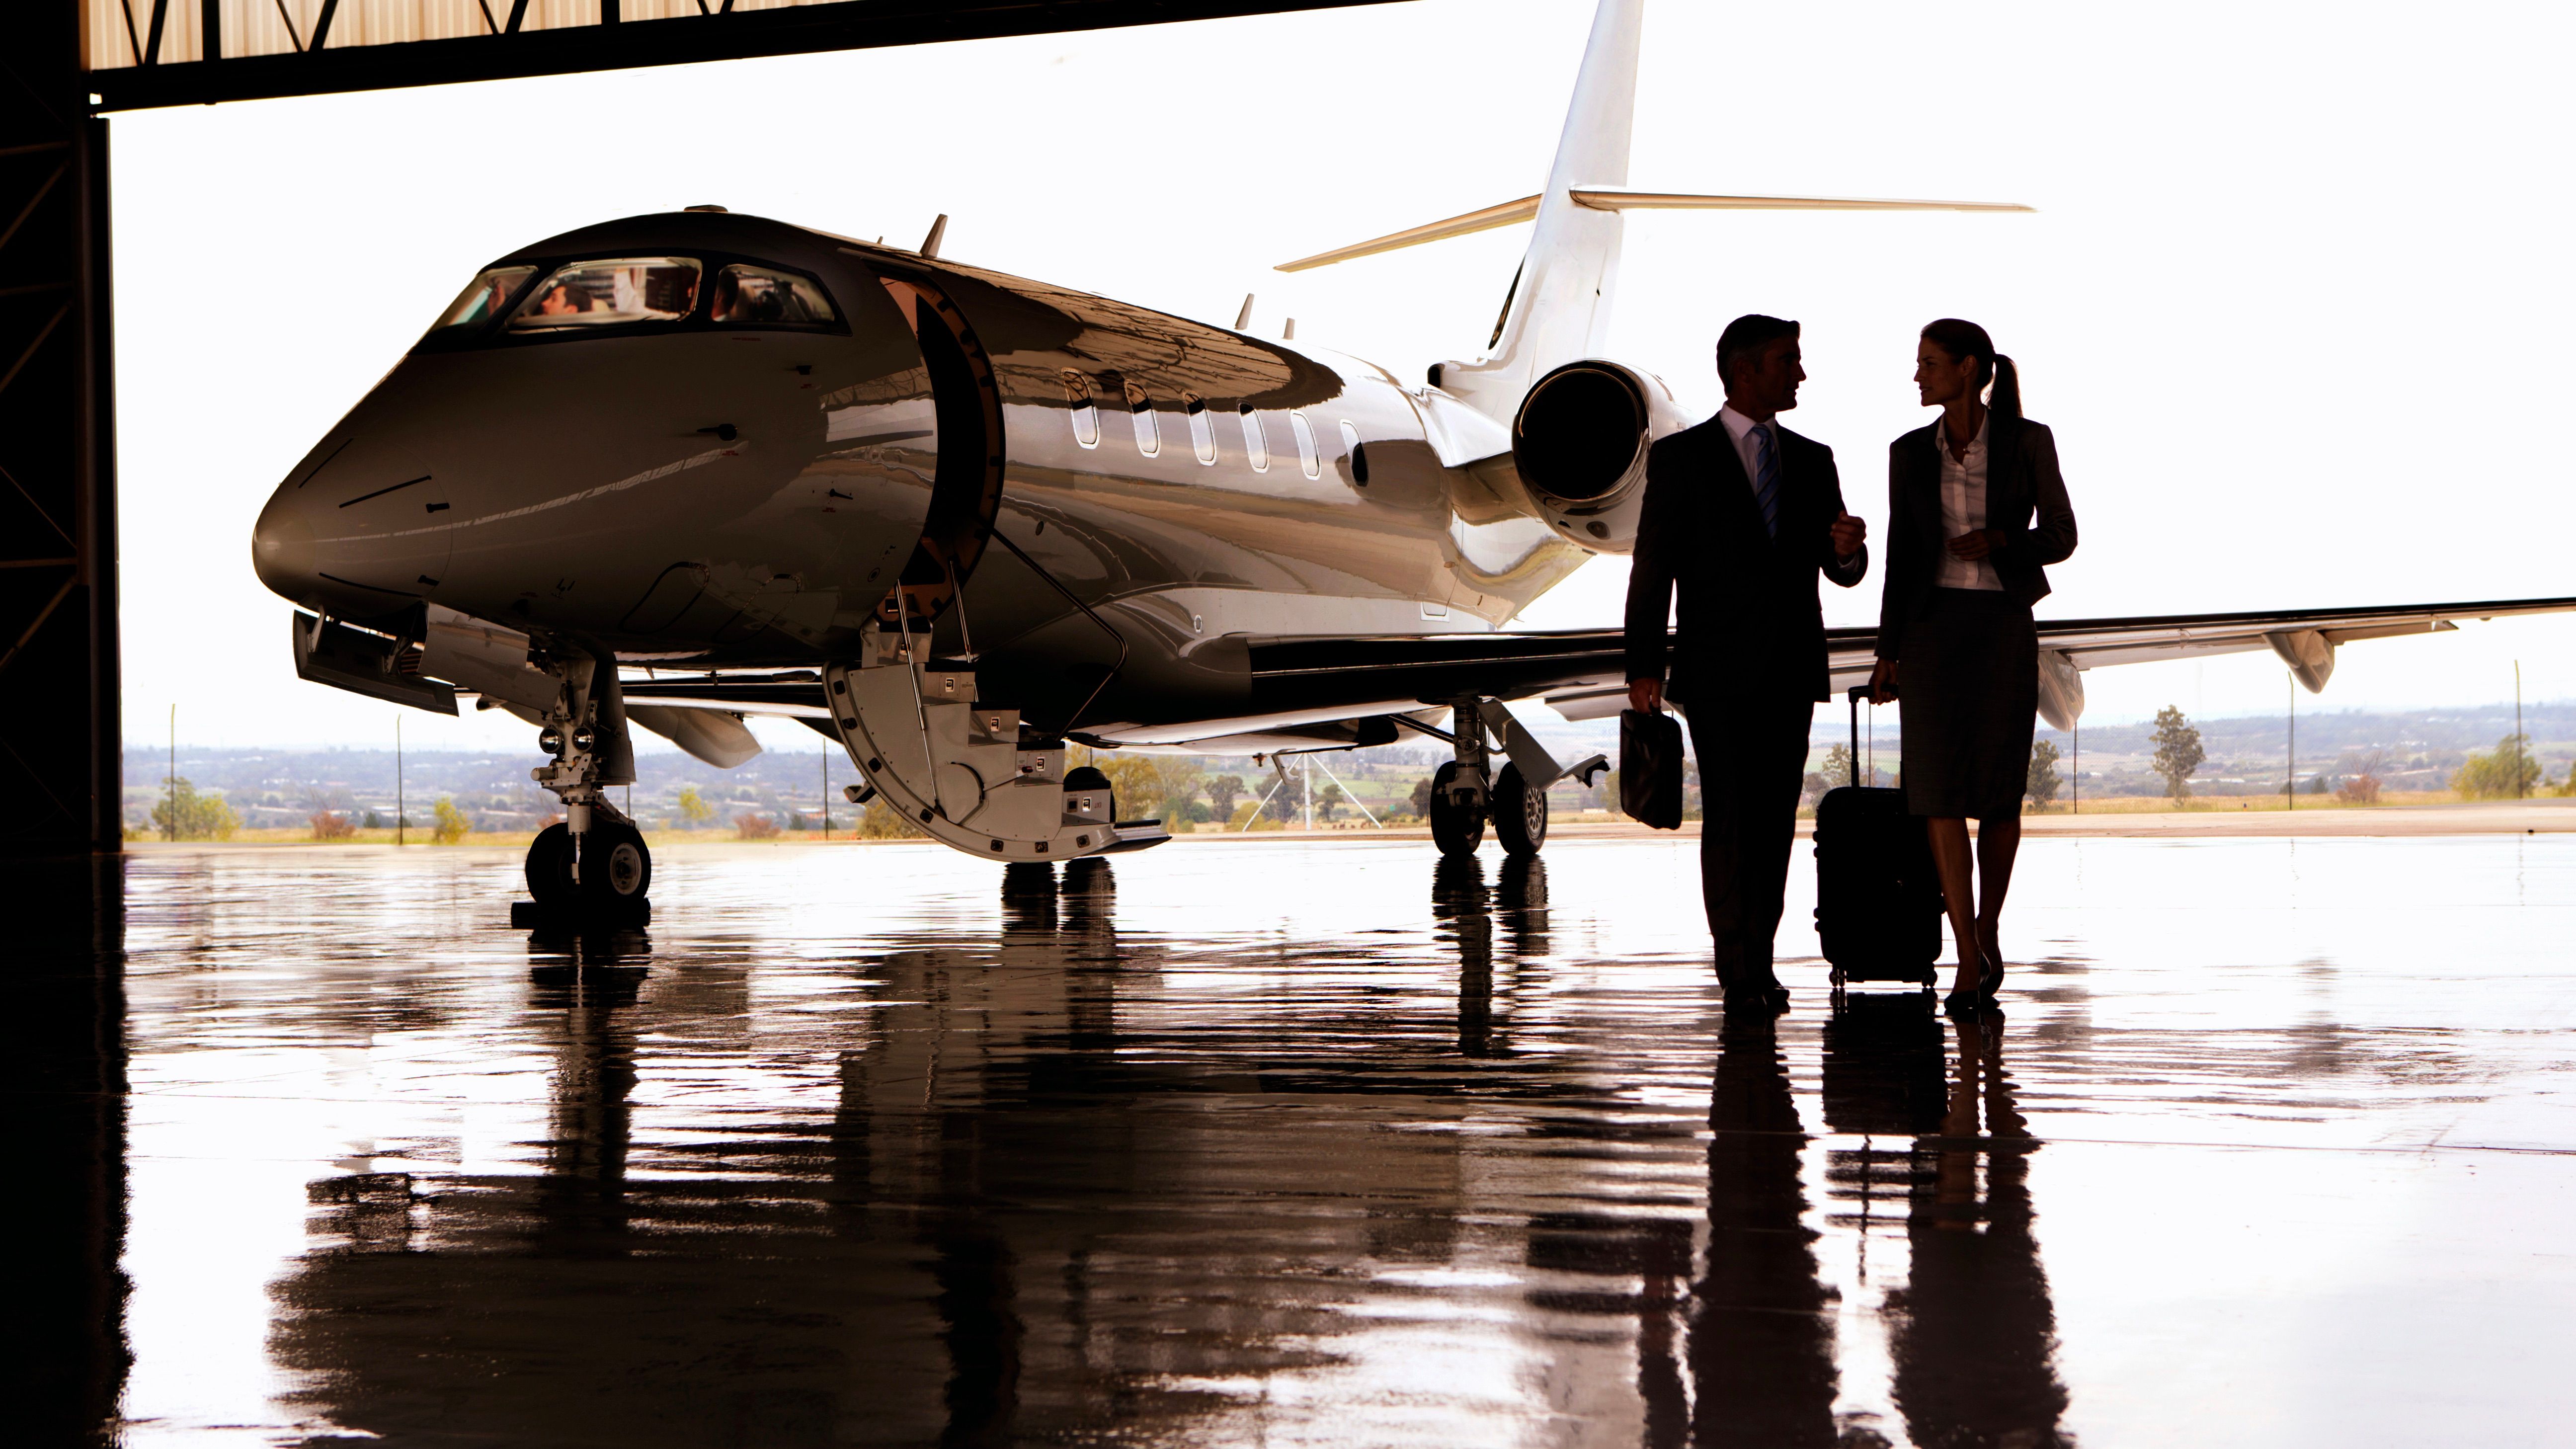 private jet in hangar with business executive passengers